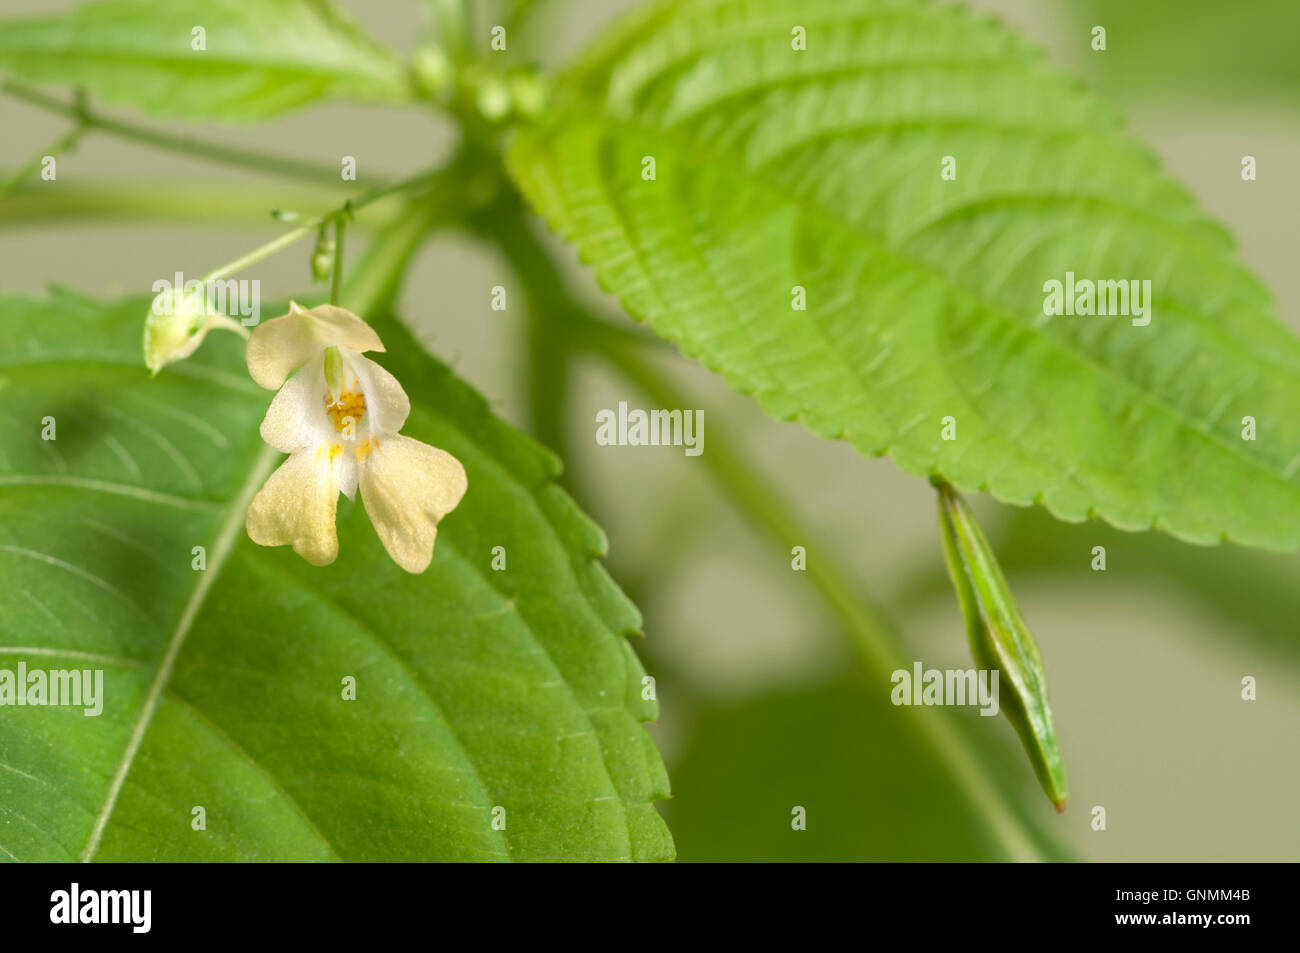 Impatiens parviflora on a green background, close up Stock Photo